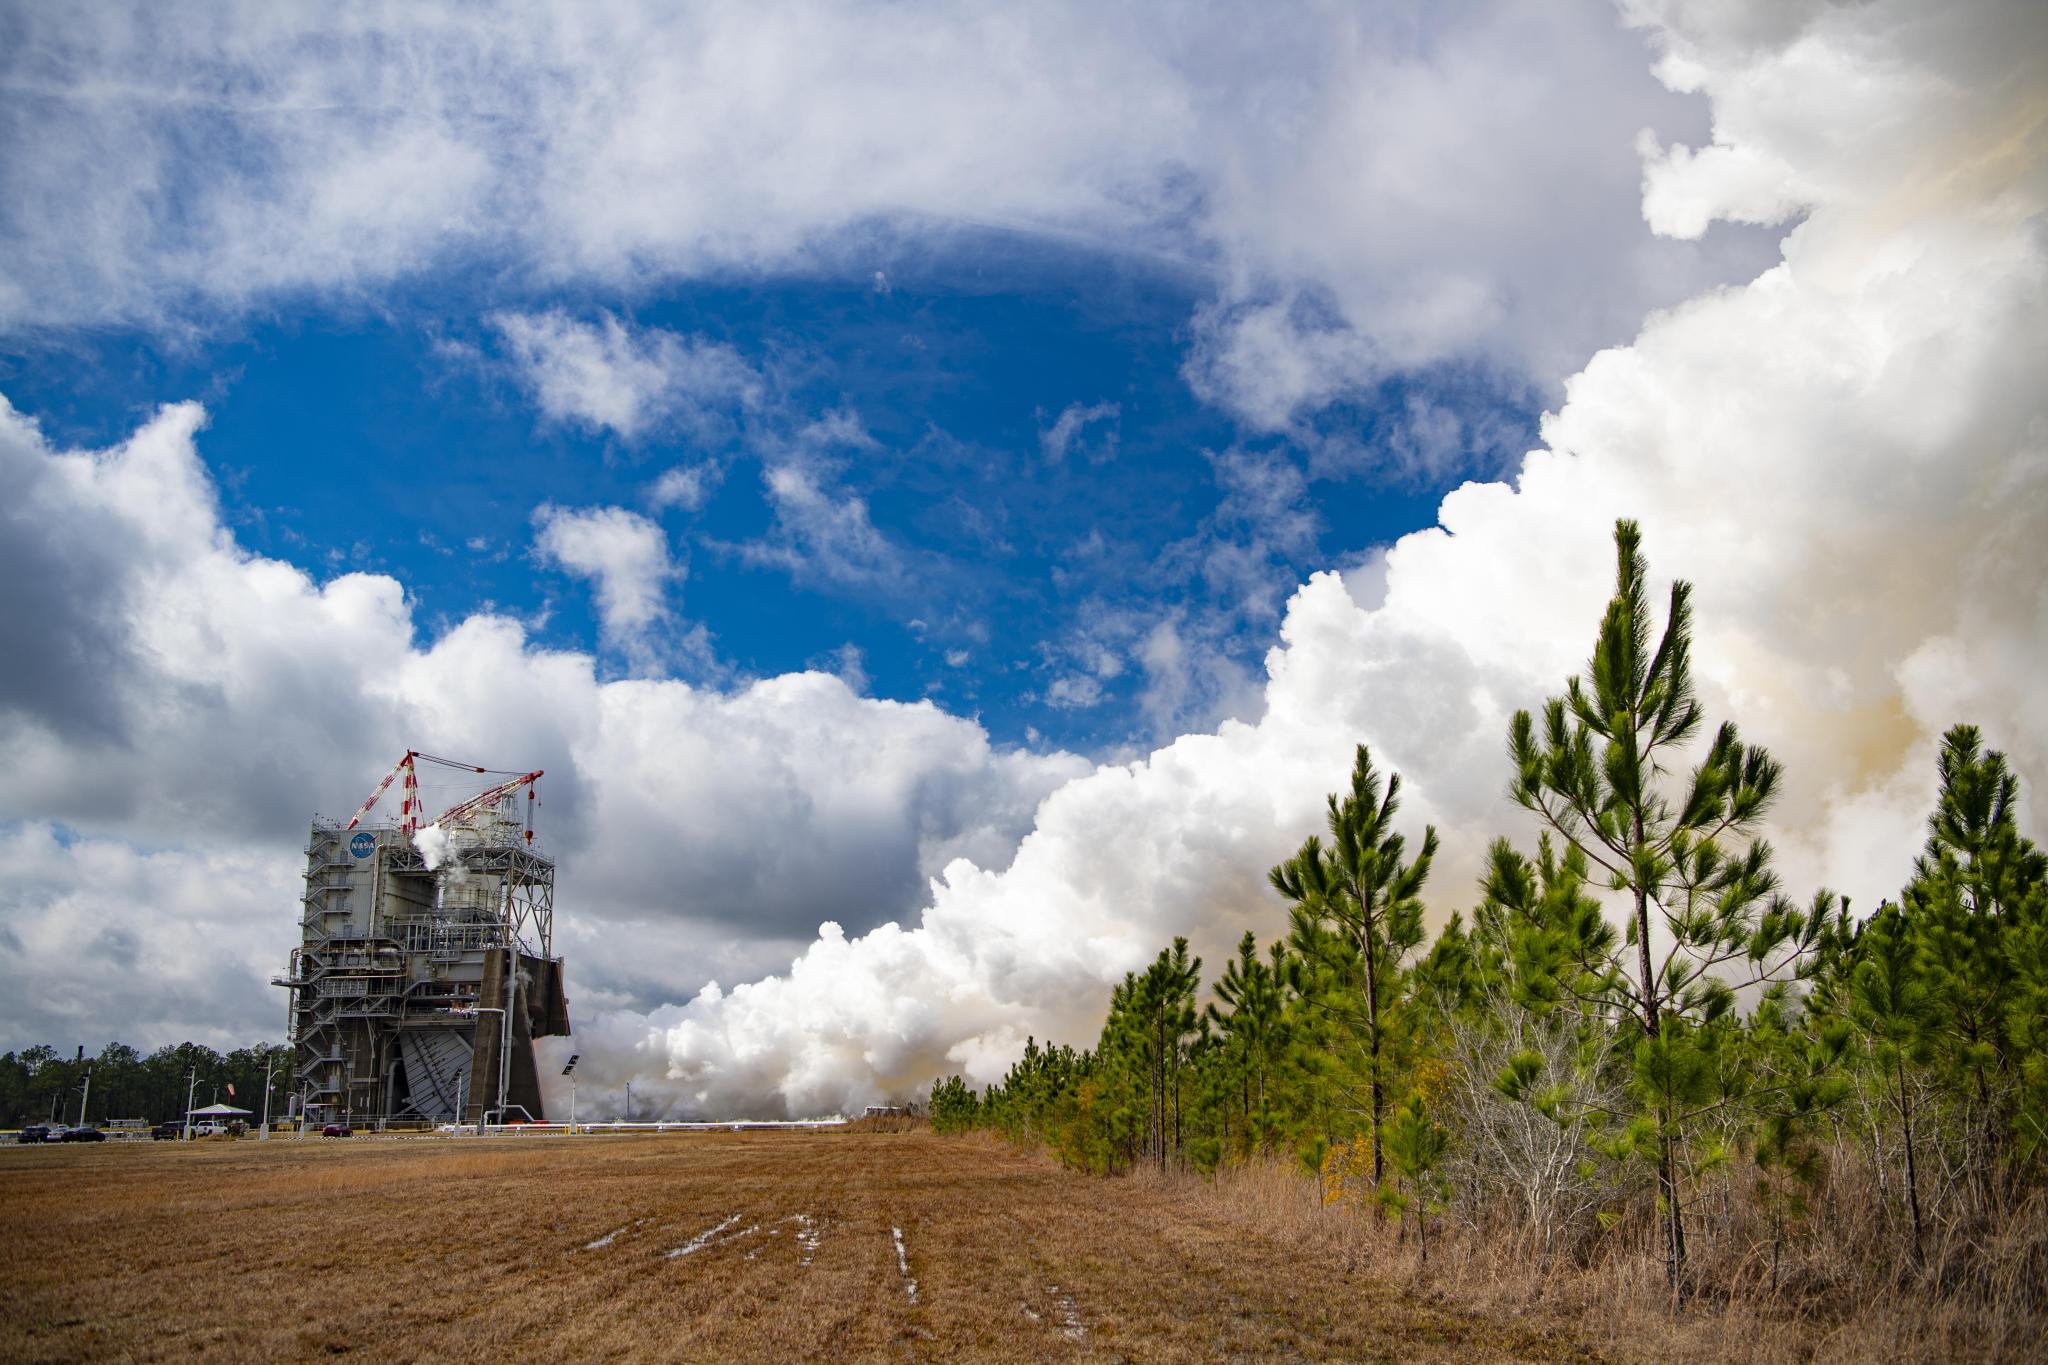 a full-duration, 500-second hot fire of an RS-25 certification engine Jan. 27 in the background as seen across an empty field